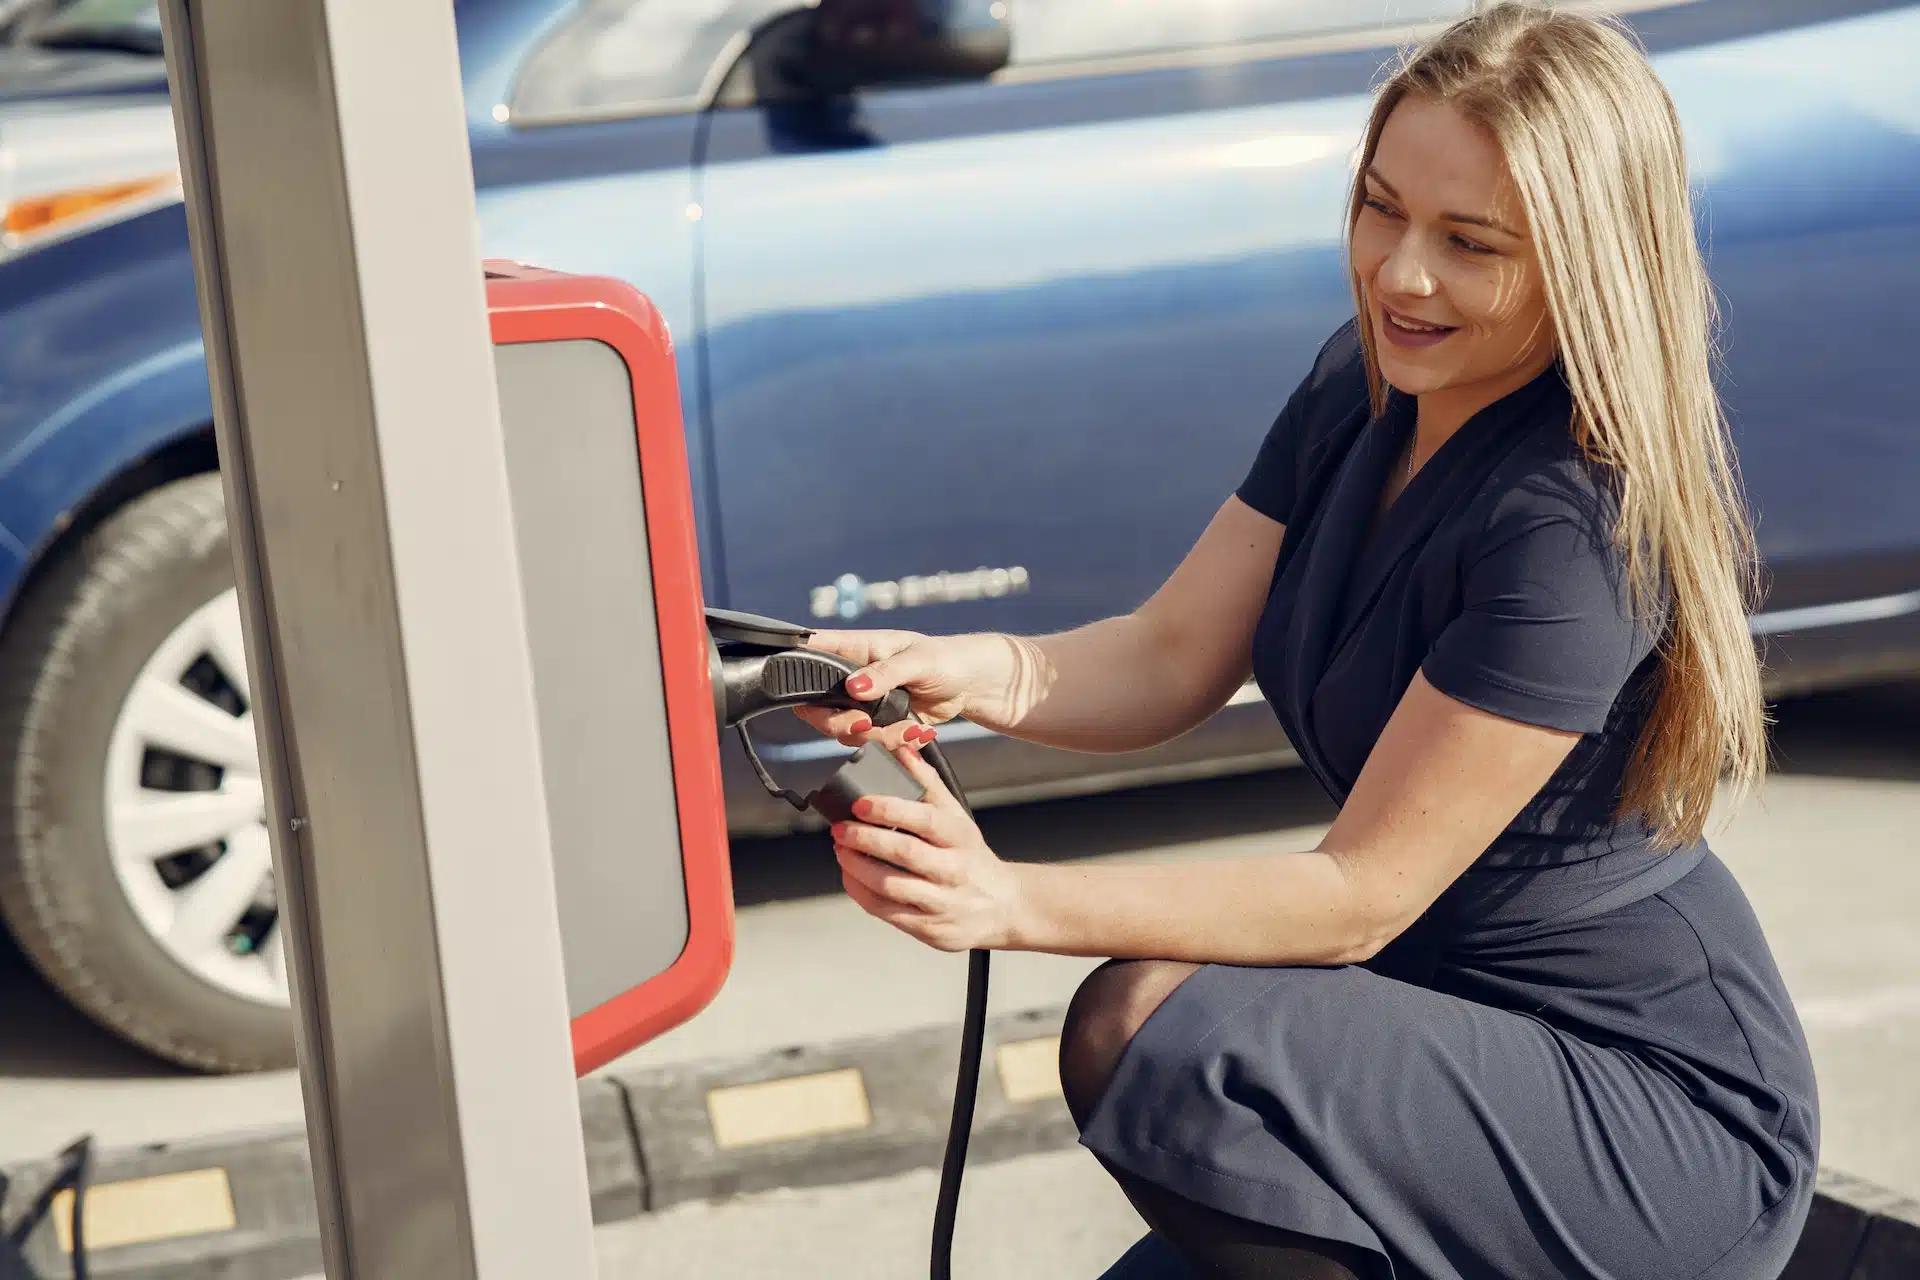 This blonde Australian lady charges her electric car so she has a lower carbon footprint.